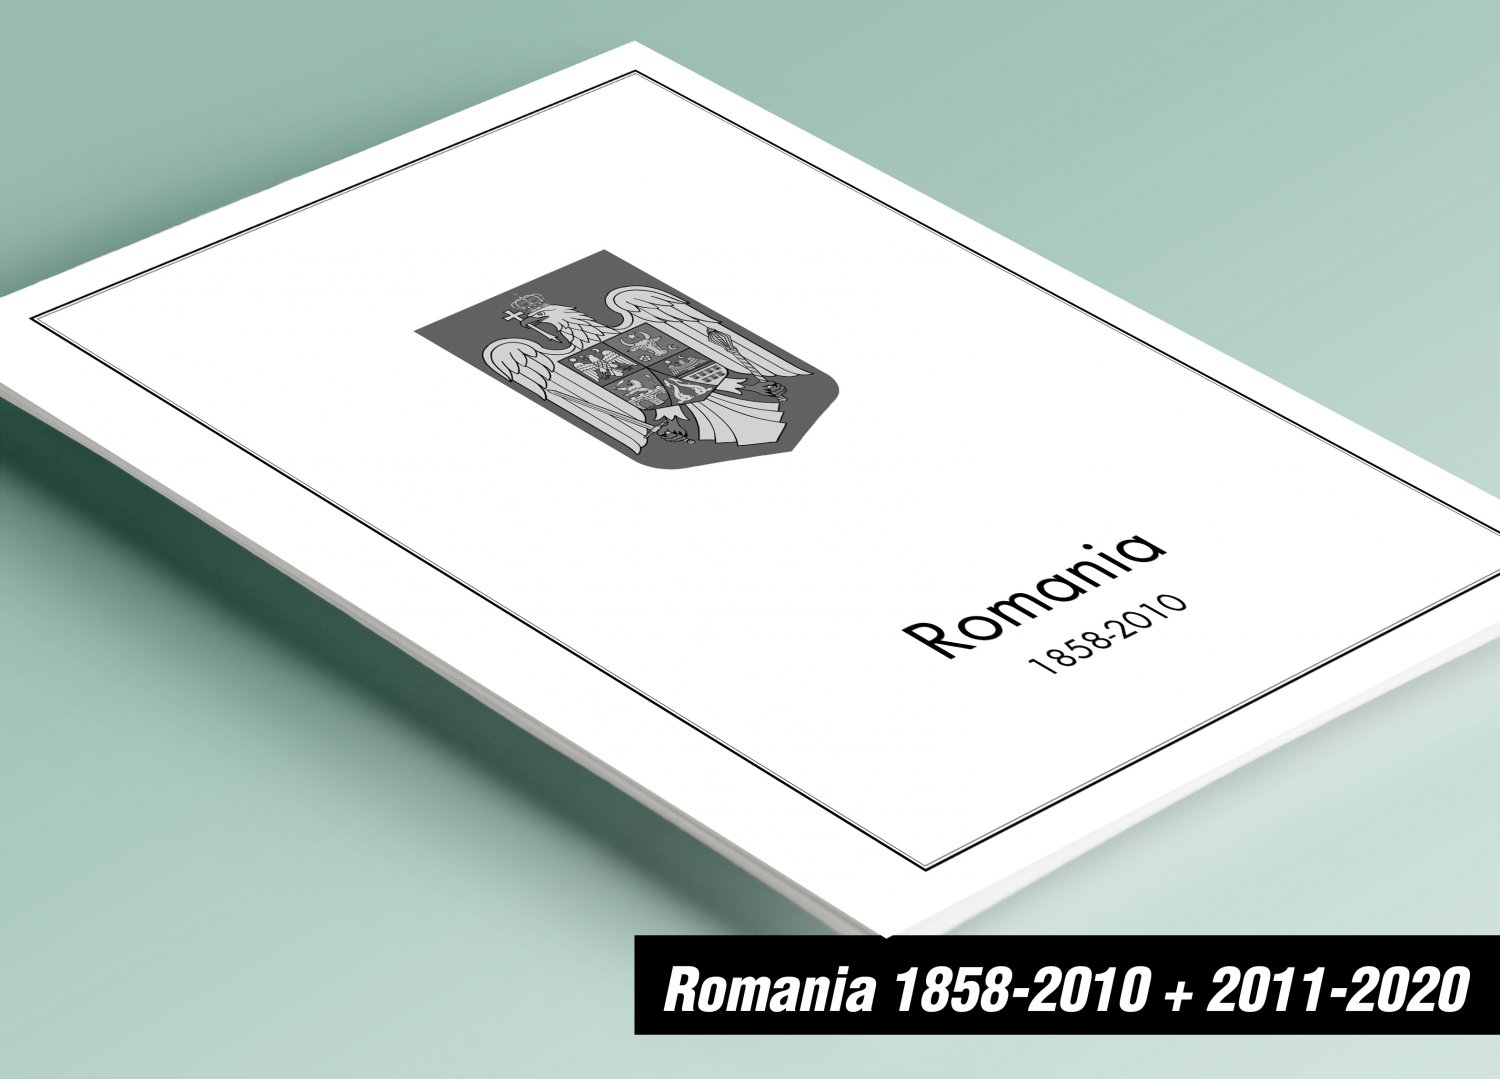 PRINTED ROMANIA 1858-2010 + 2011-2020 STAMP PRINTED STAMP ALBUM PAGES (1102 pages)